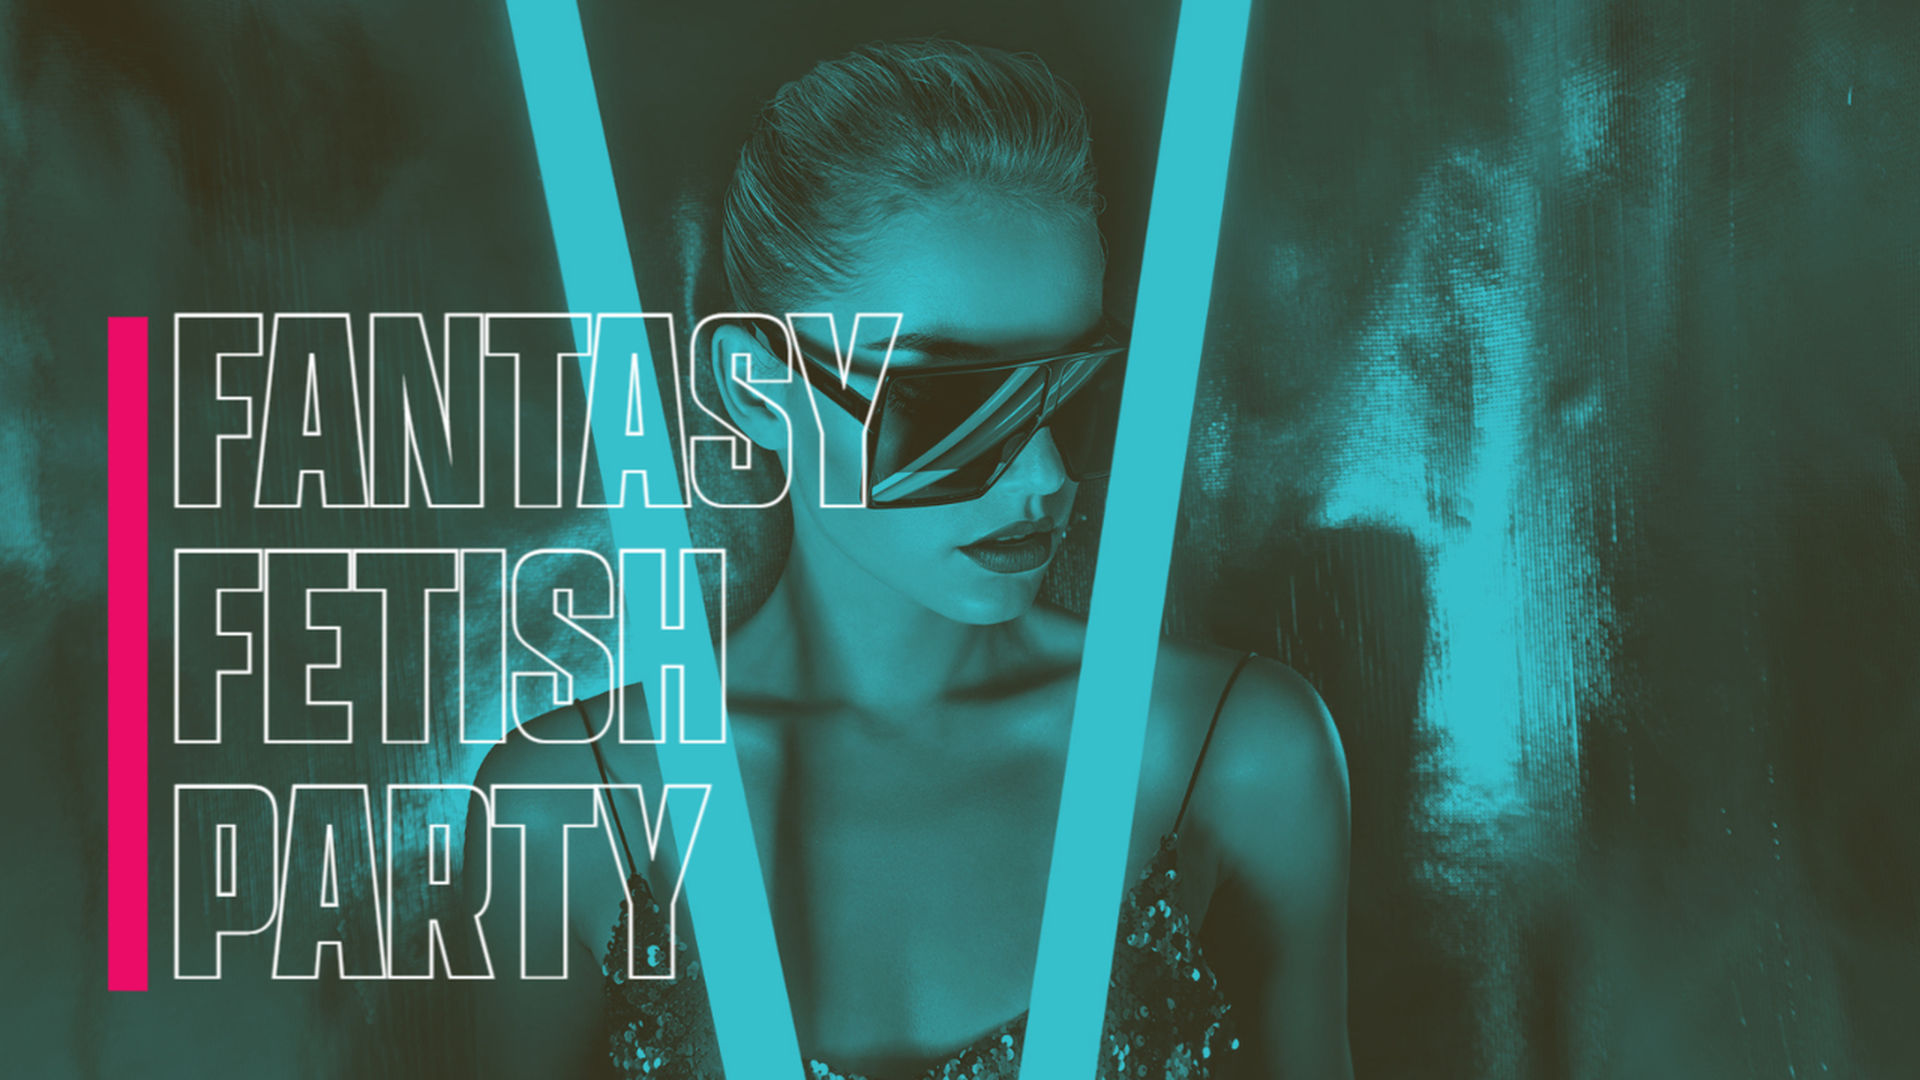 Fantasy Fetish Party 20 Real Wild Girls Epic Party Adventures